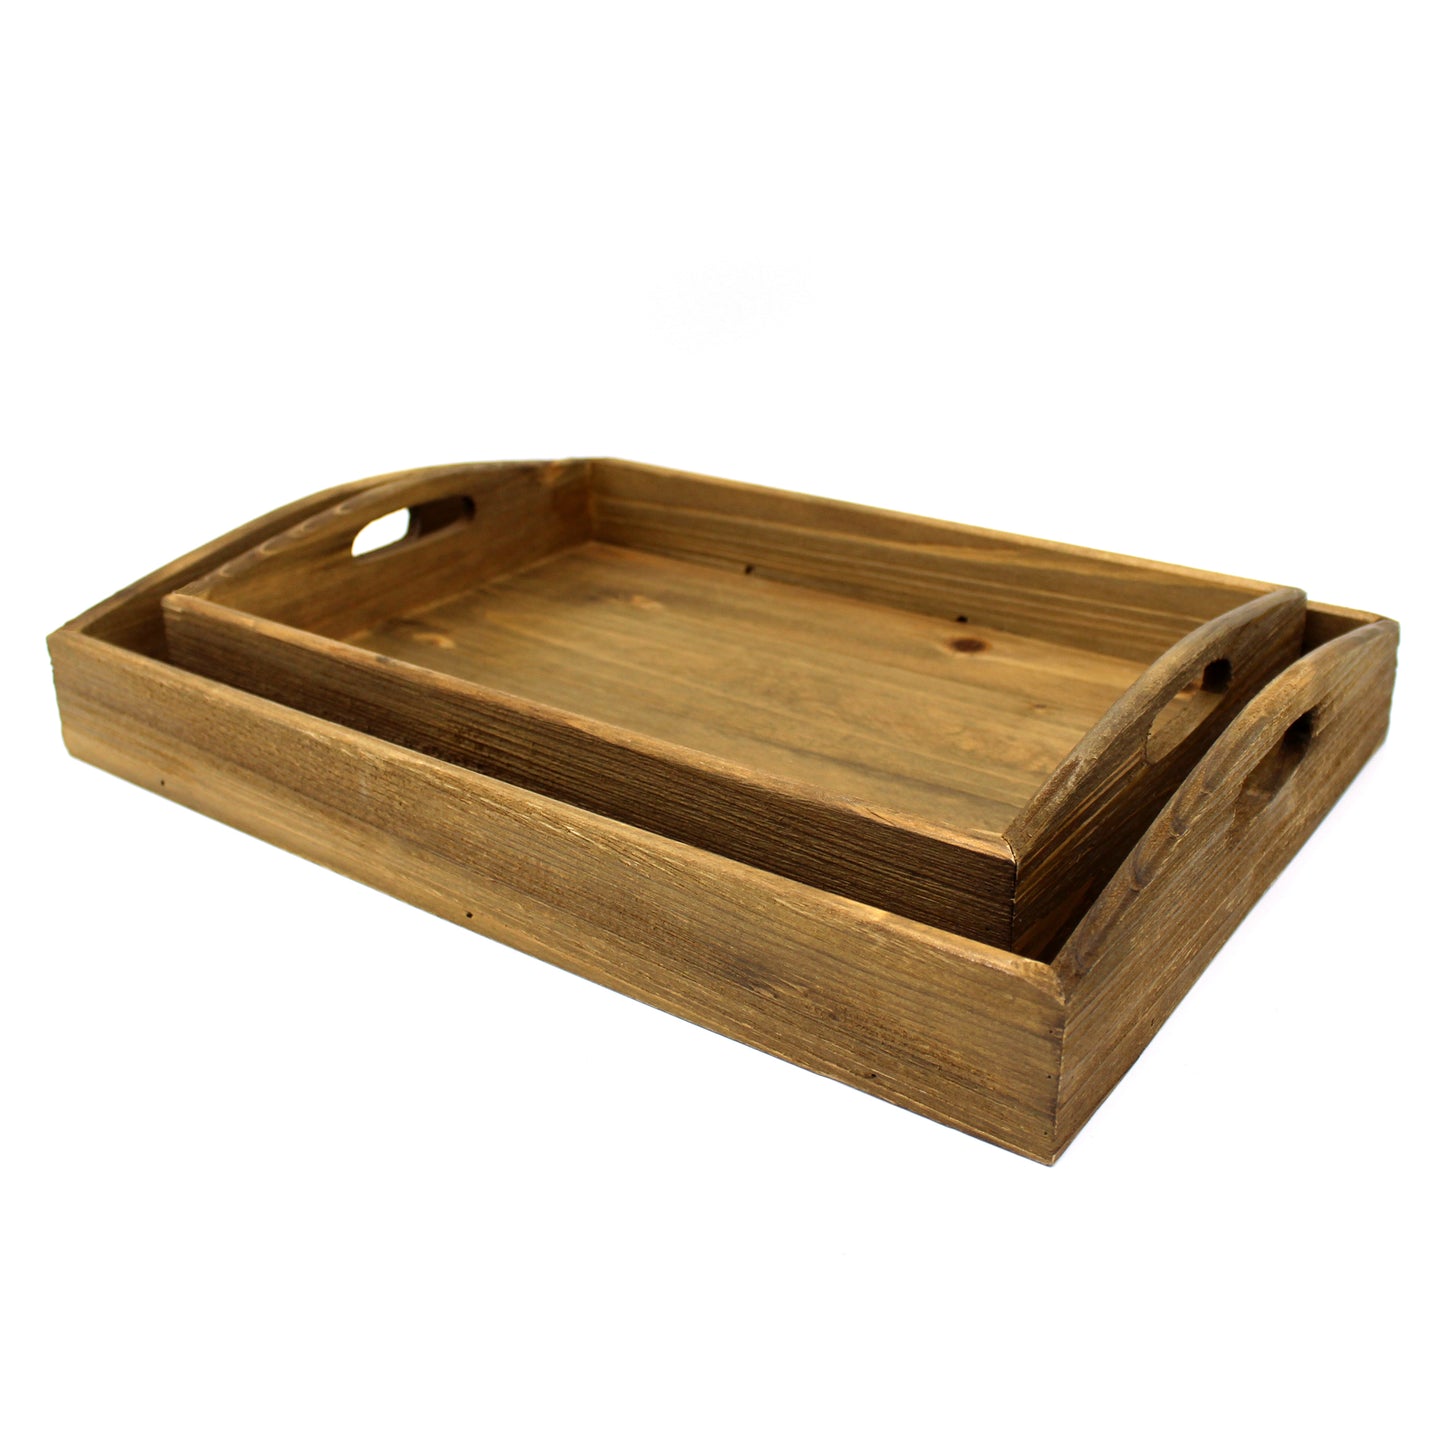 CVHOMEDECO. Primitives Wooden Nesting Tray Country Farmhouse Wood Serving Tray for Dining Tableware, Kitchen, Food, Breakfast, Coffee, Bar, Party or Display. Set of 2